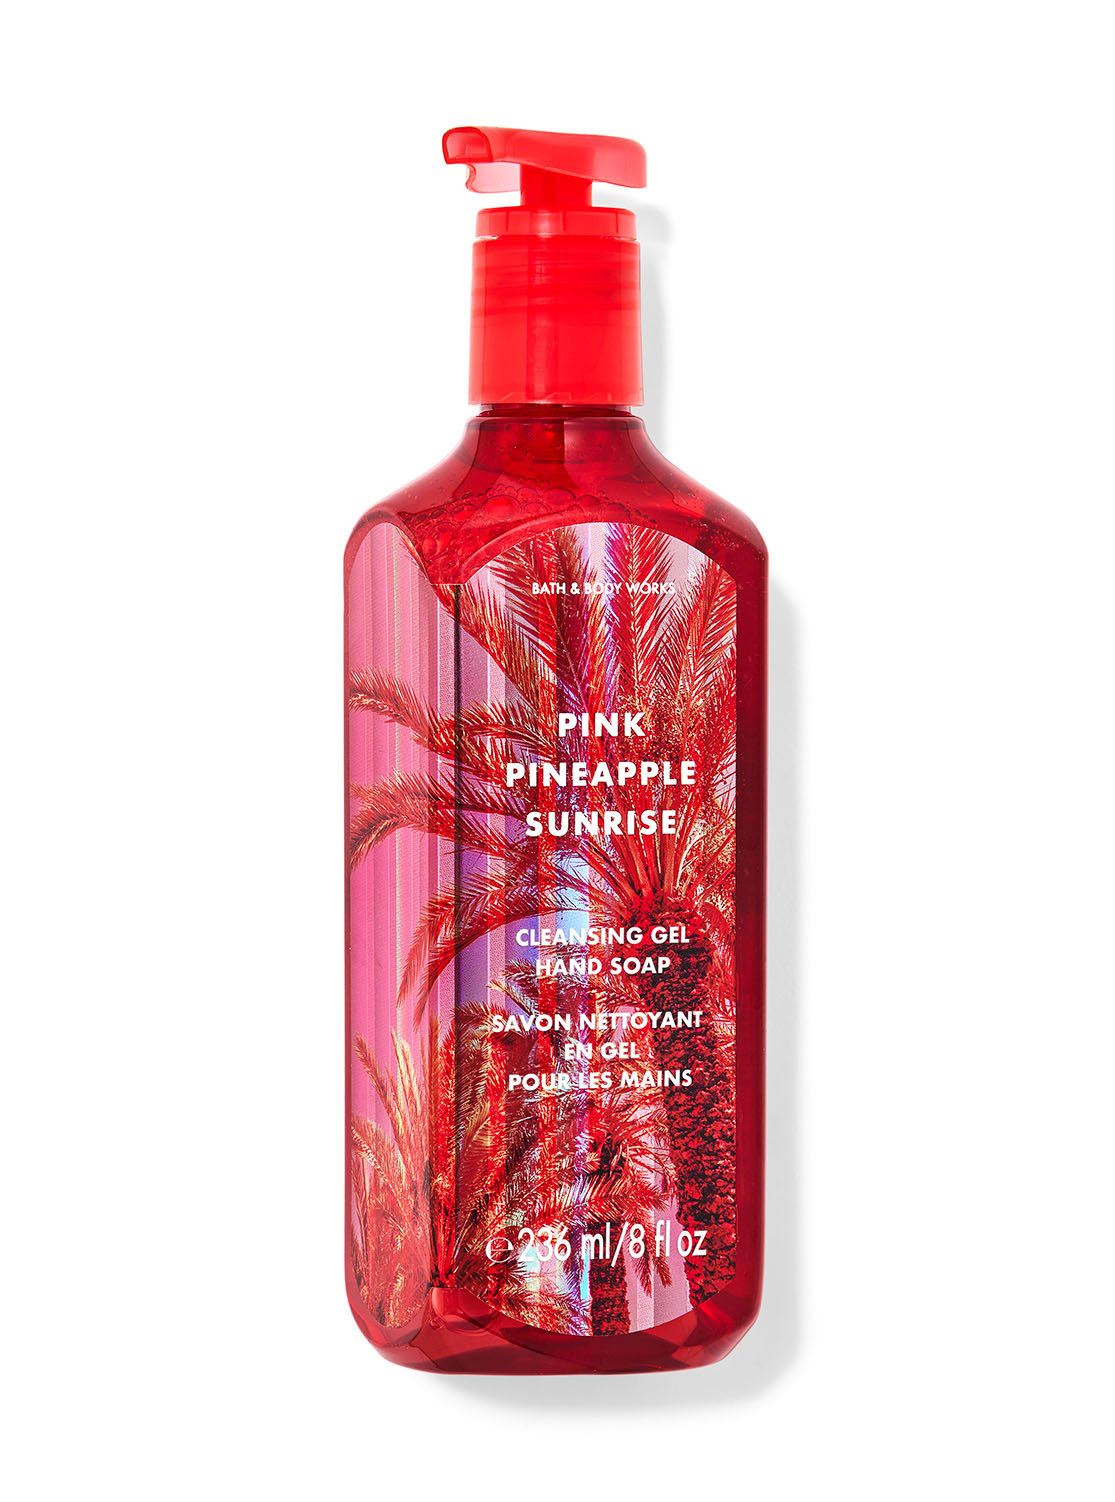 Pink Pineapple Sunrise Cleansing Gel Hand Soap